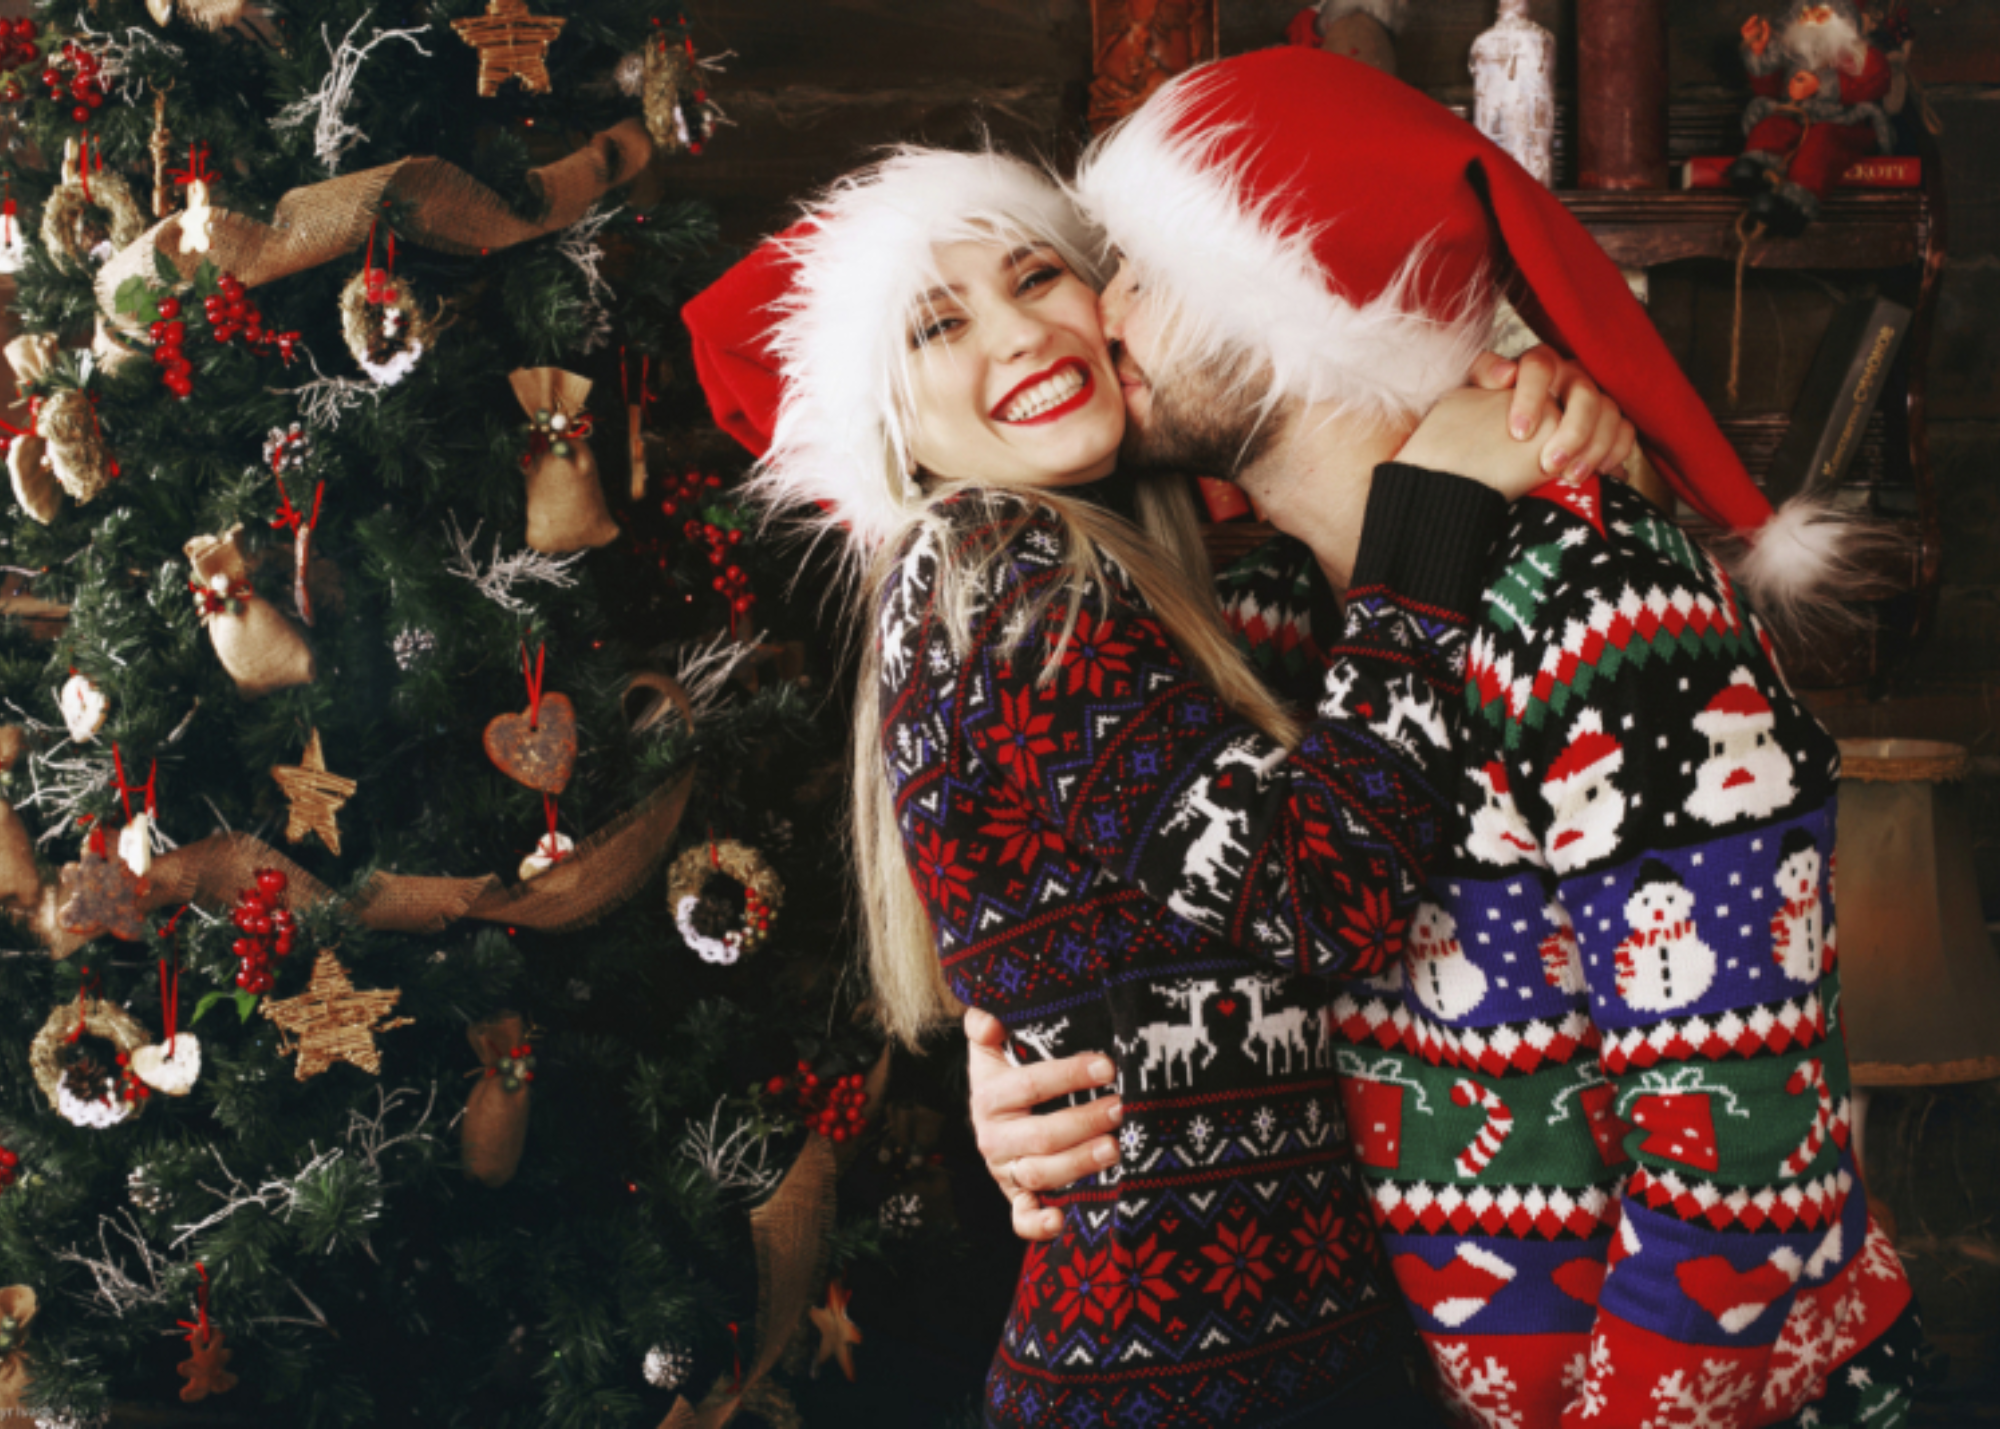 A man kissing a woman, with a Christmas tree in the background